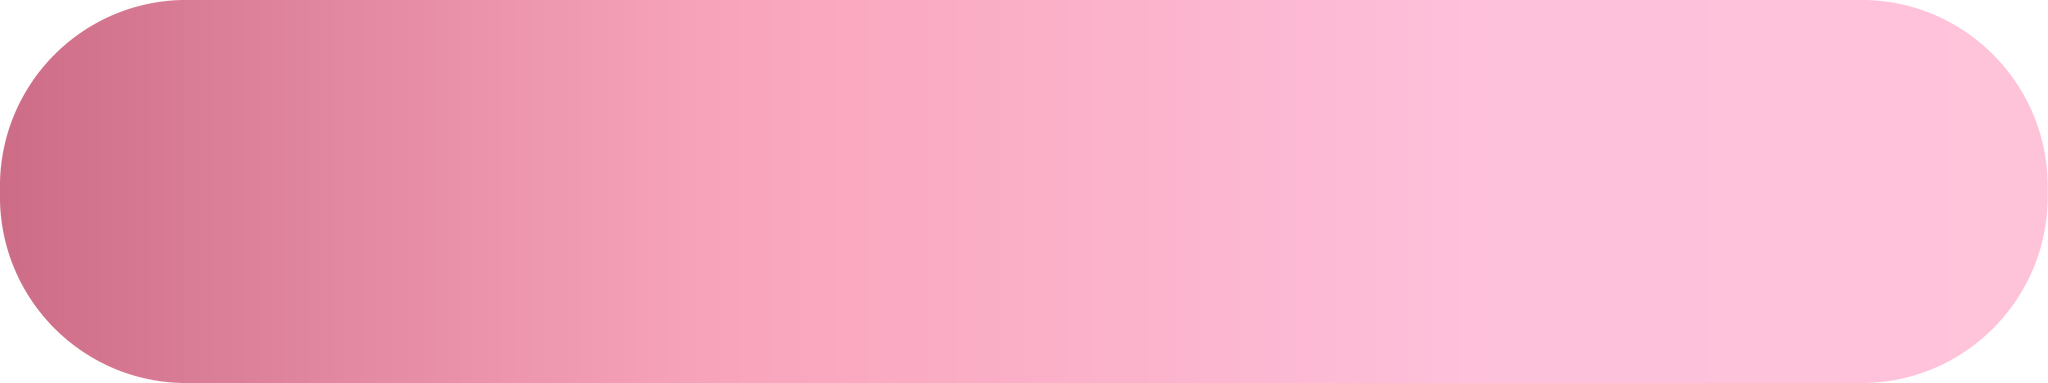 Gradient Pink Rounded Rectangle